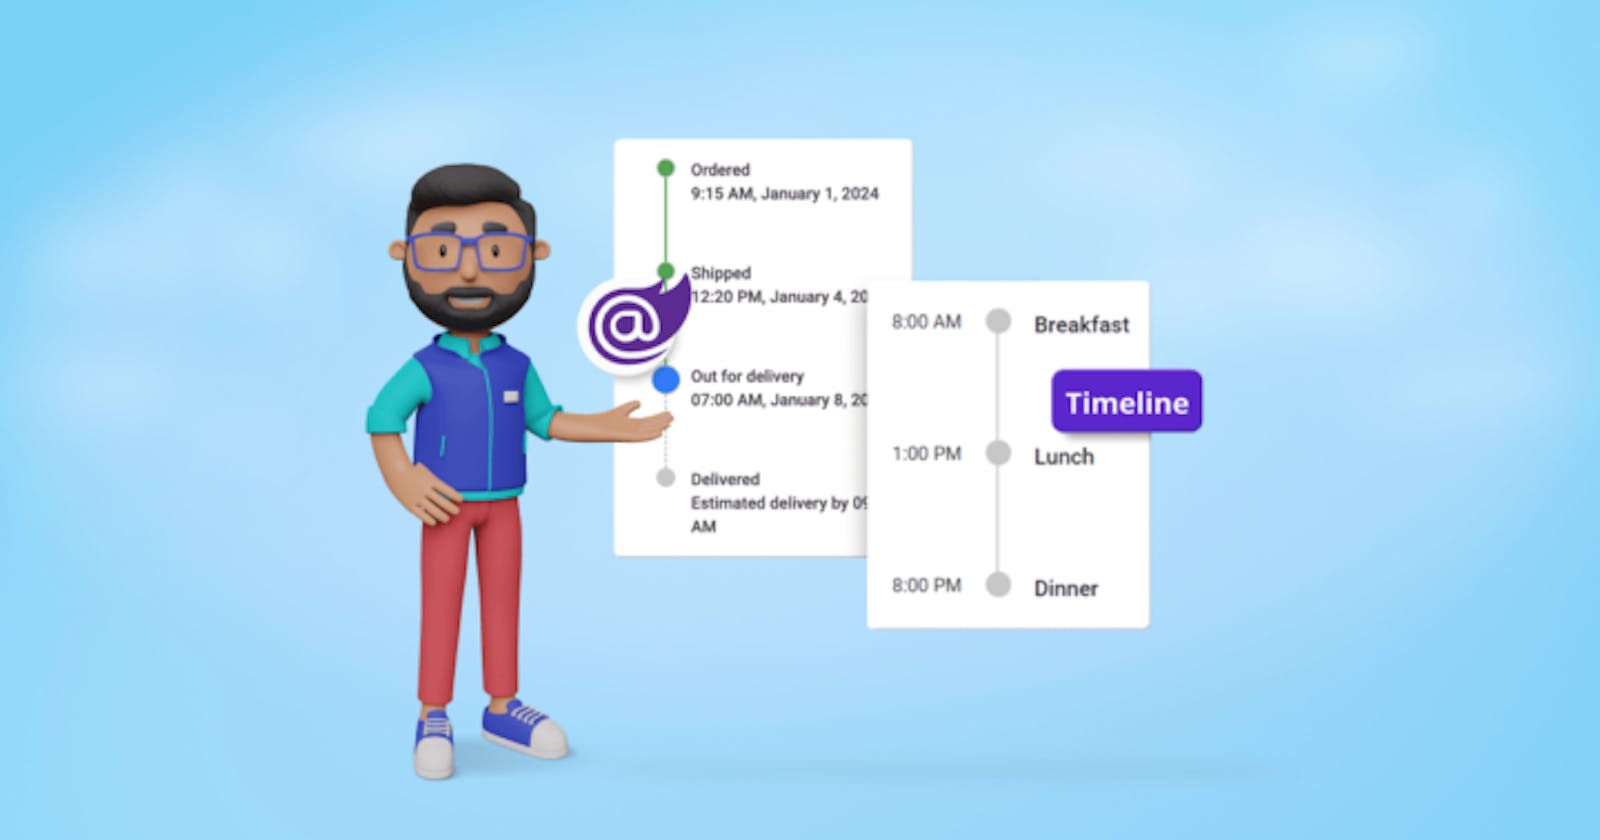 Introducing the New Blazor Timeline Component